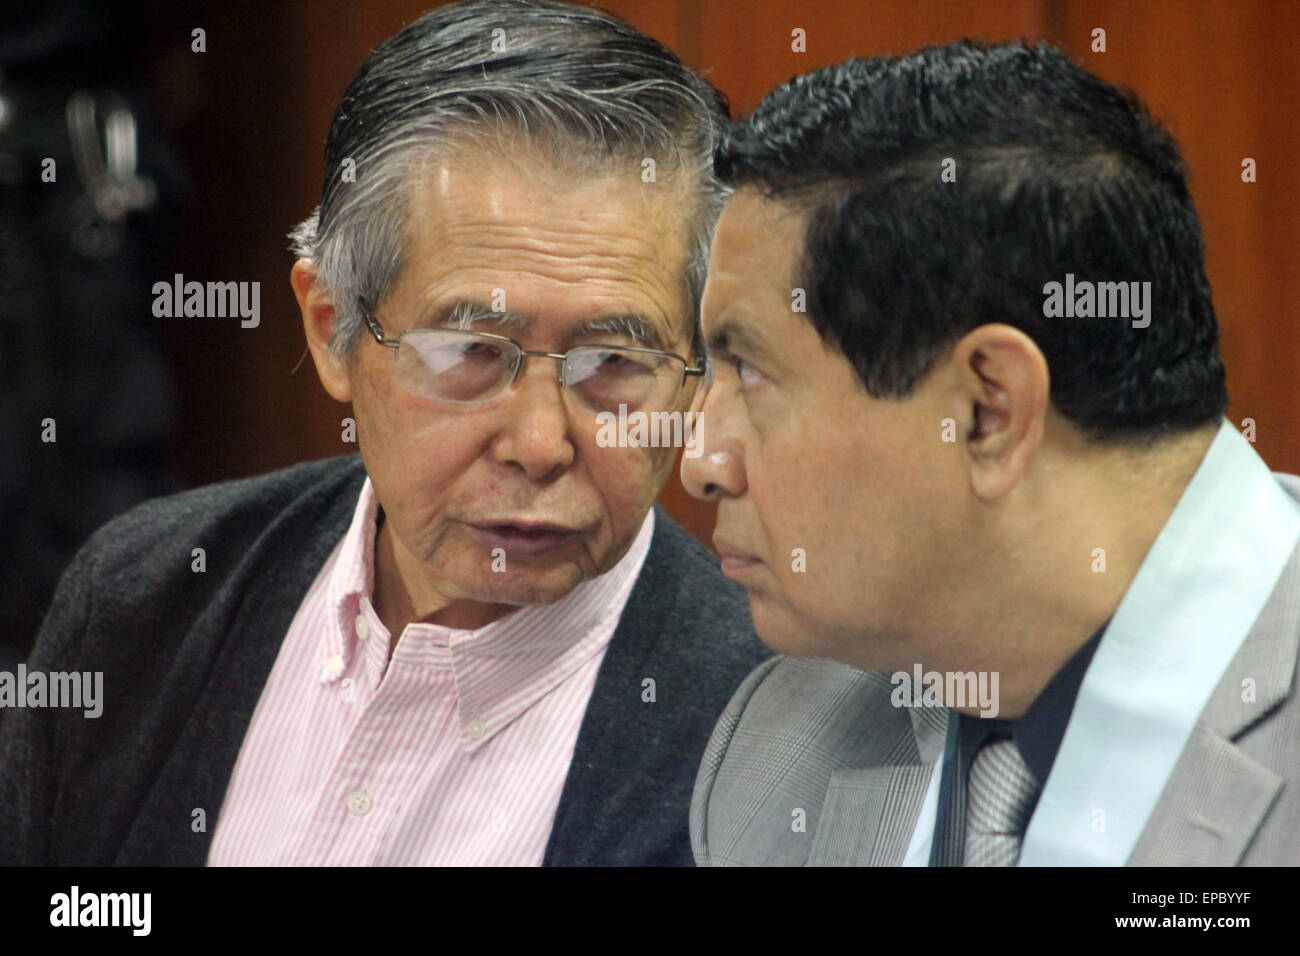 Lima, Peru. 15th May, 2015. Peru's former President Alberto Fujimori (L) talks with his lawyer William Paco Castillo (R) during his hearing in Lima's Supreme Court of Justice in Lima city, capital of Peru, on May 15, 2015. Former Peruvian President Alberto Fujimori presented on Friday an 'Habeas Corpus' for the replacement of the telephone line in his detention center, which was suspended after he granted interviews to the media, according to local press. © Luis Camacho/Xinhua/Alamy Live News Stock Photo